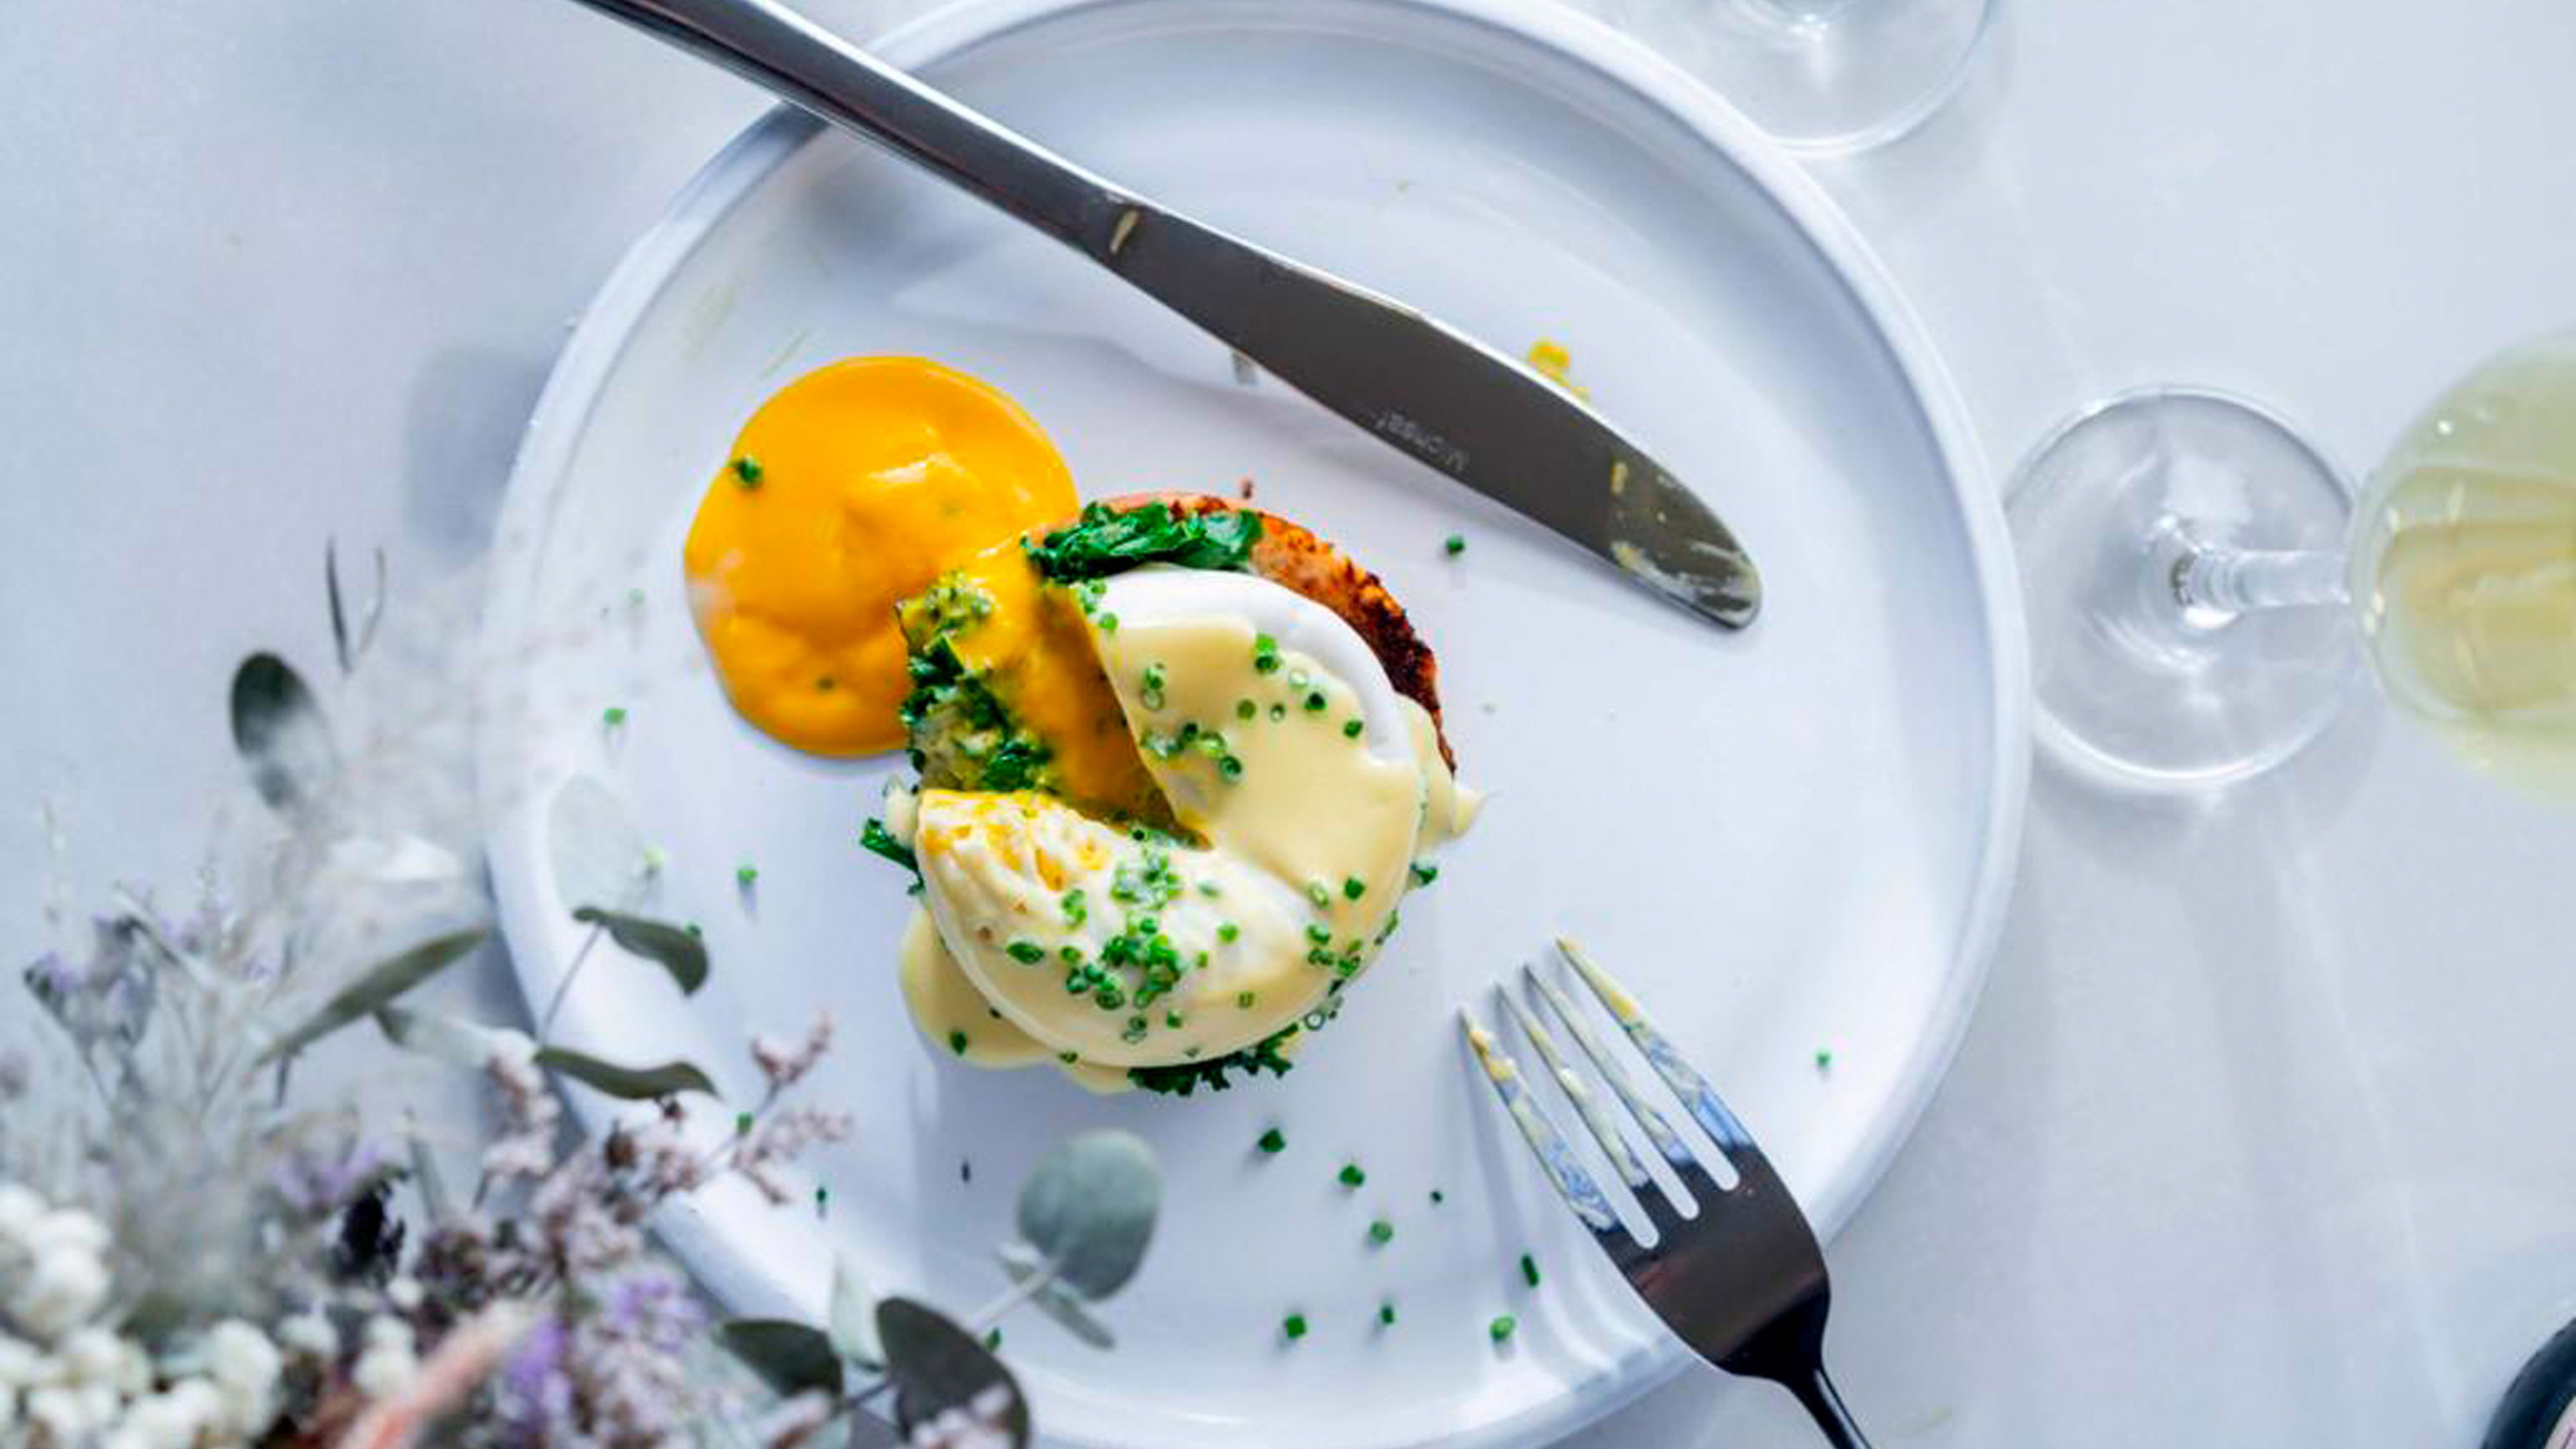 This poached egg has a perfectly runny yolk—and it’s vegan